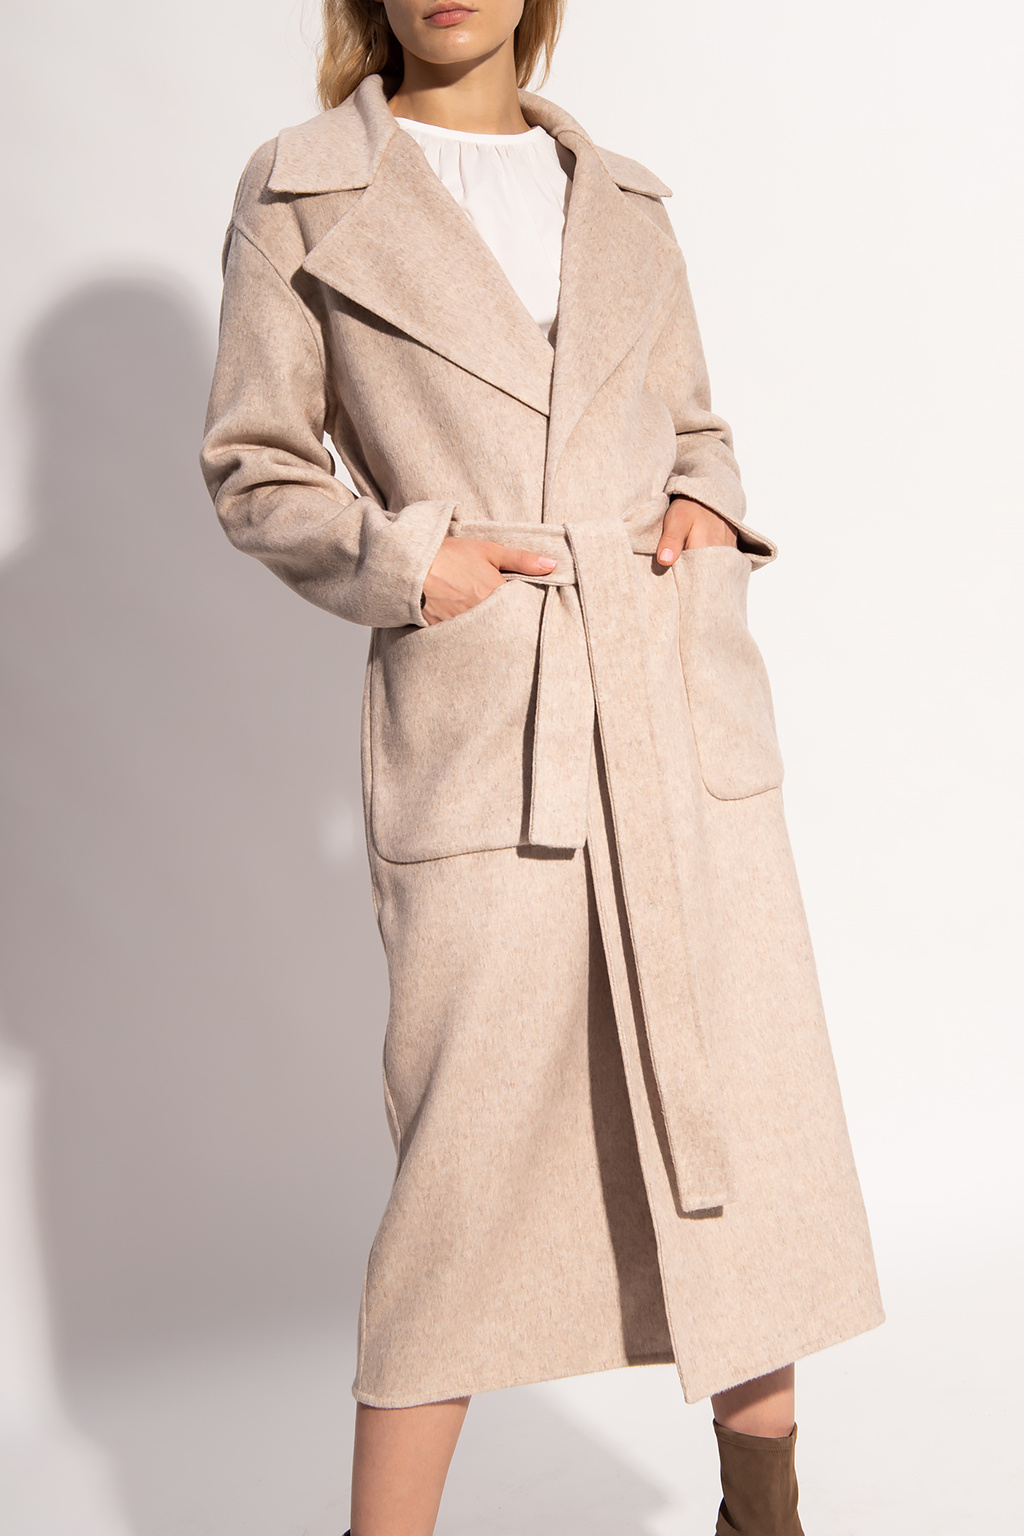 Download the latest version of the app Coat with notch lapels